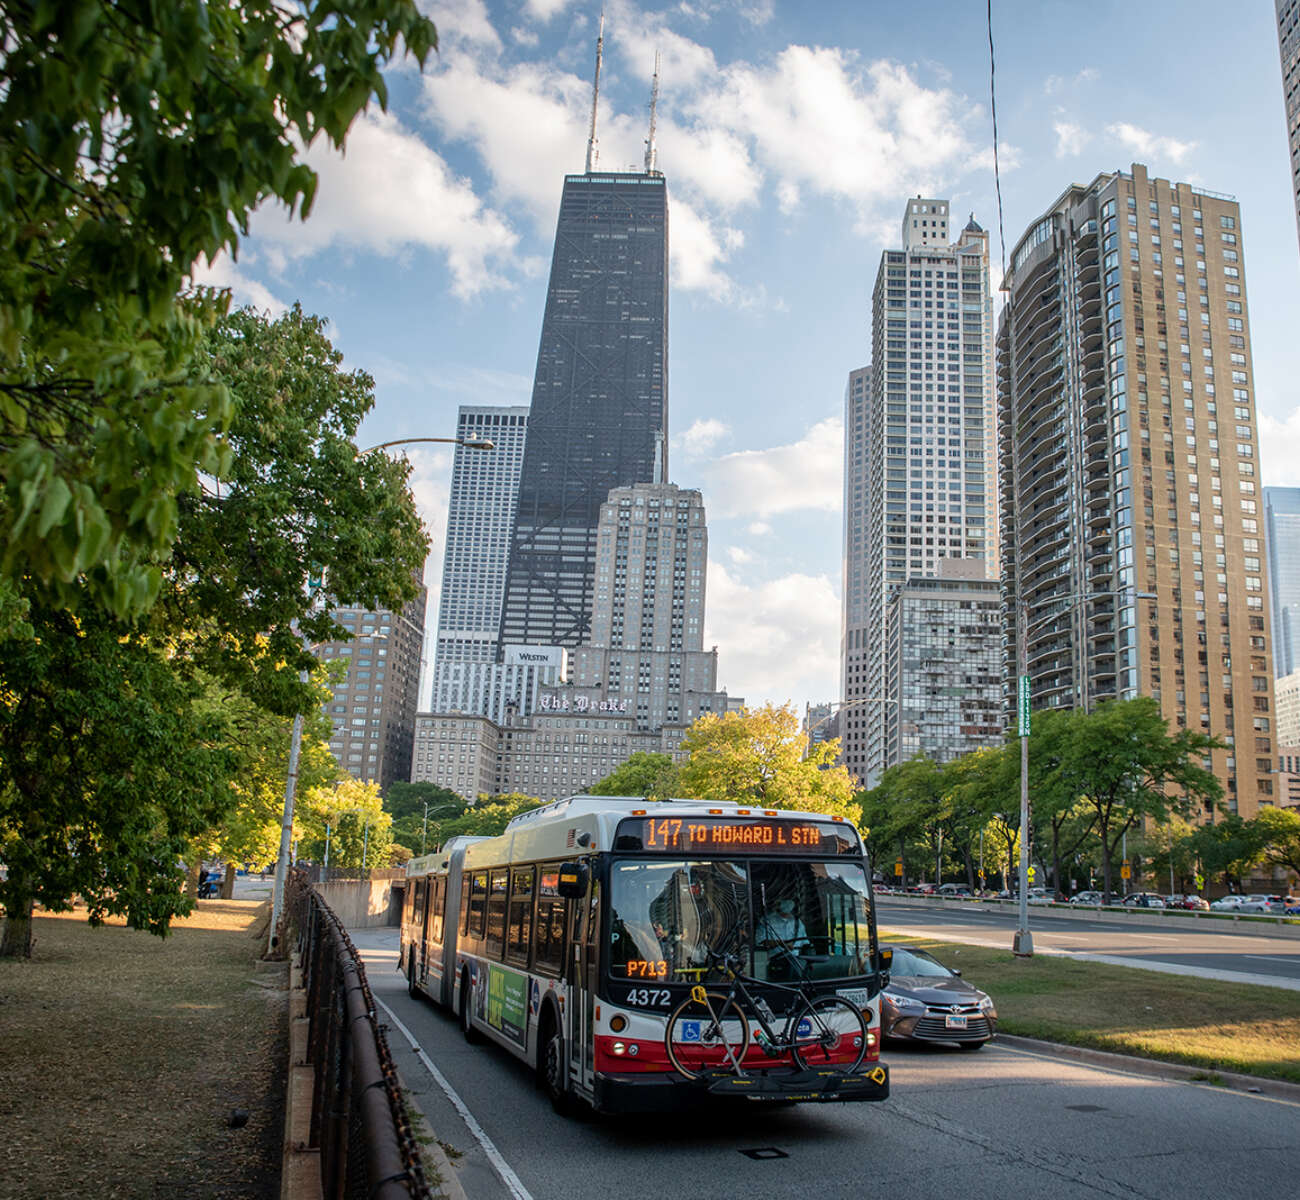 A CTA bus in downtown Chicago with skyscrapers in the background and trees next to the street.